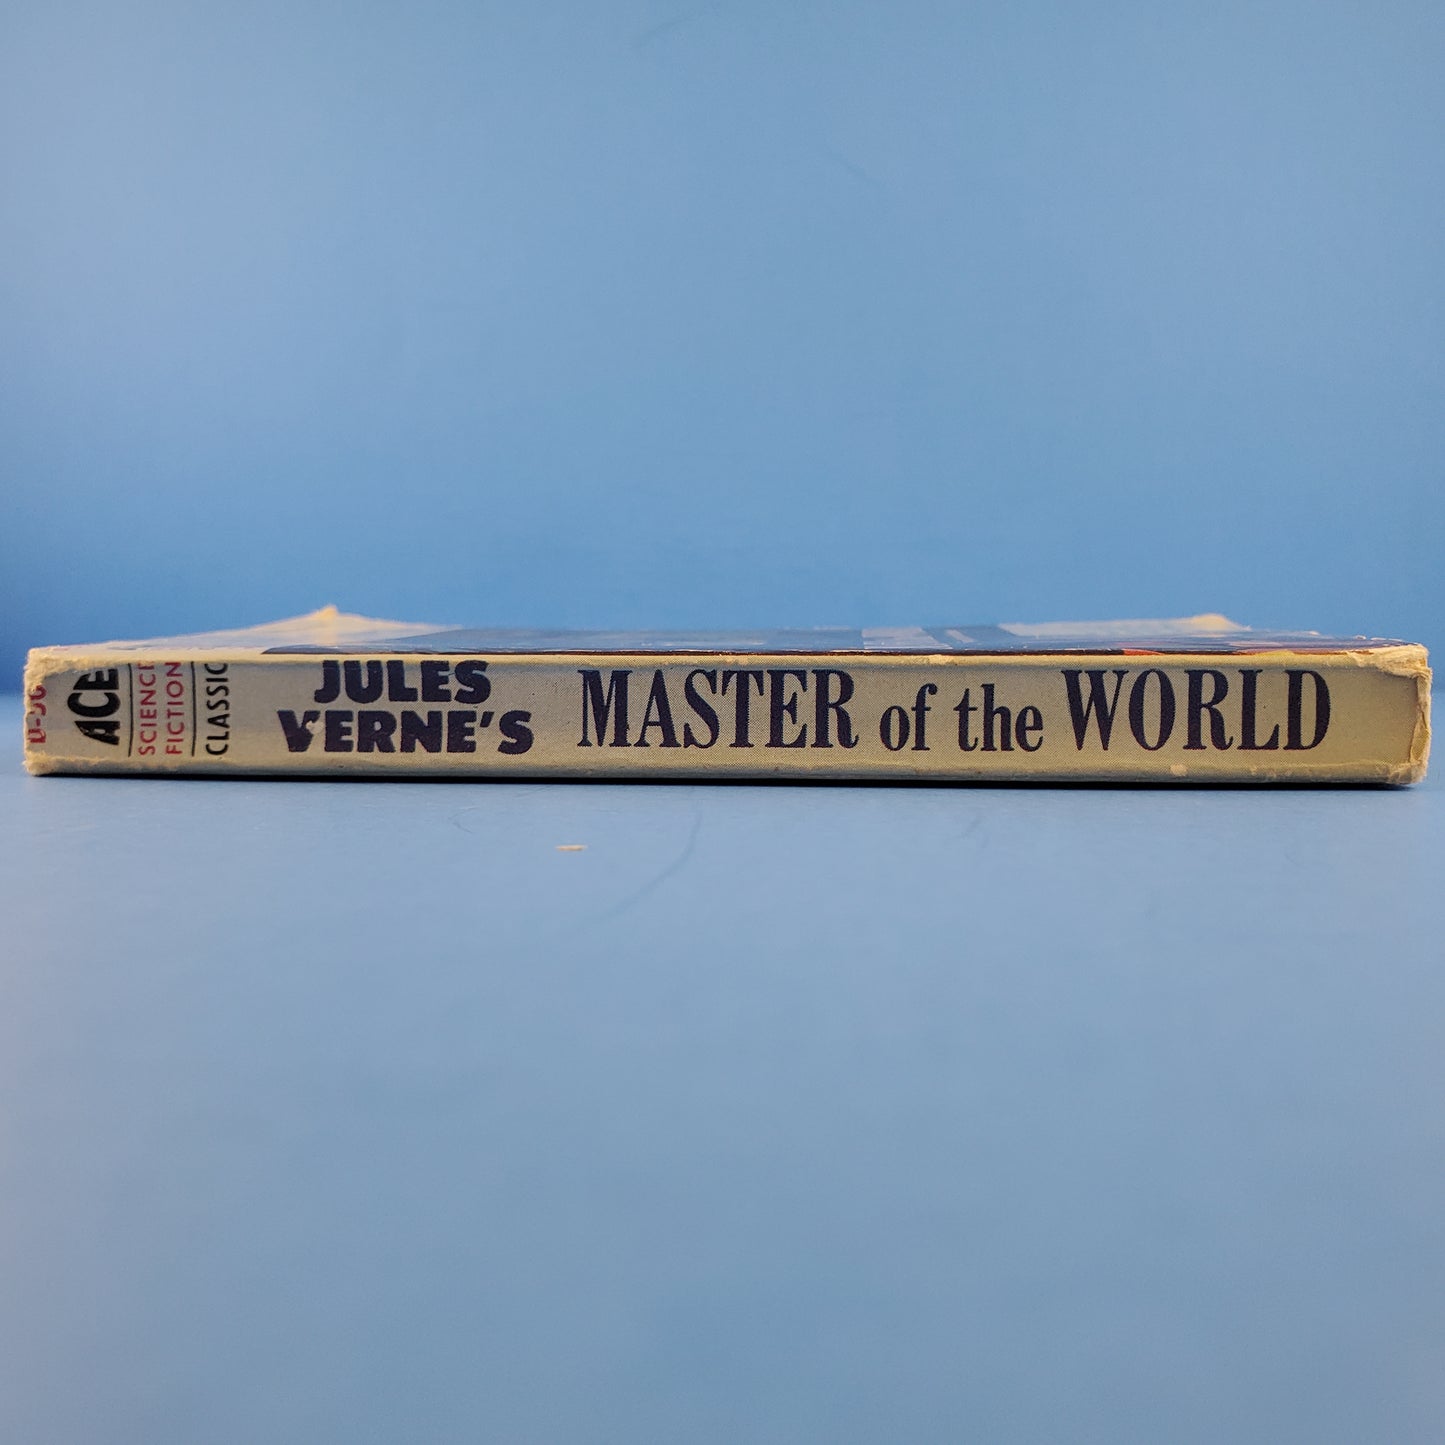 Master of the World